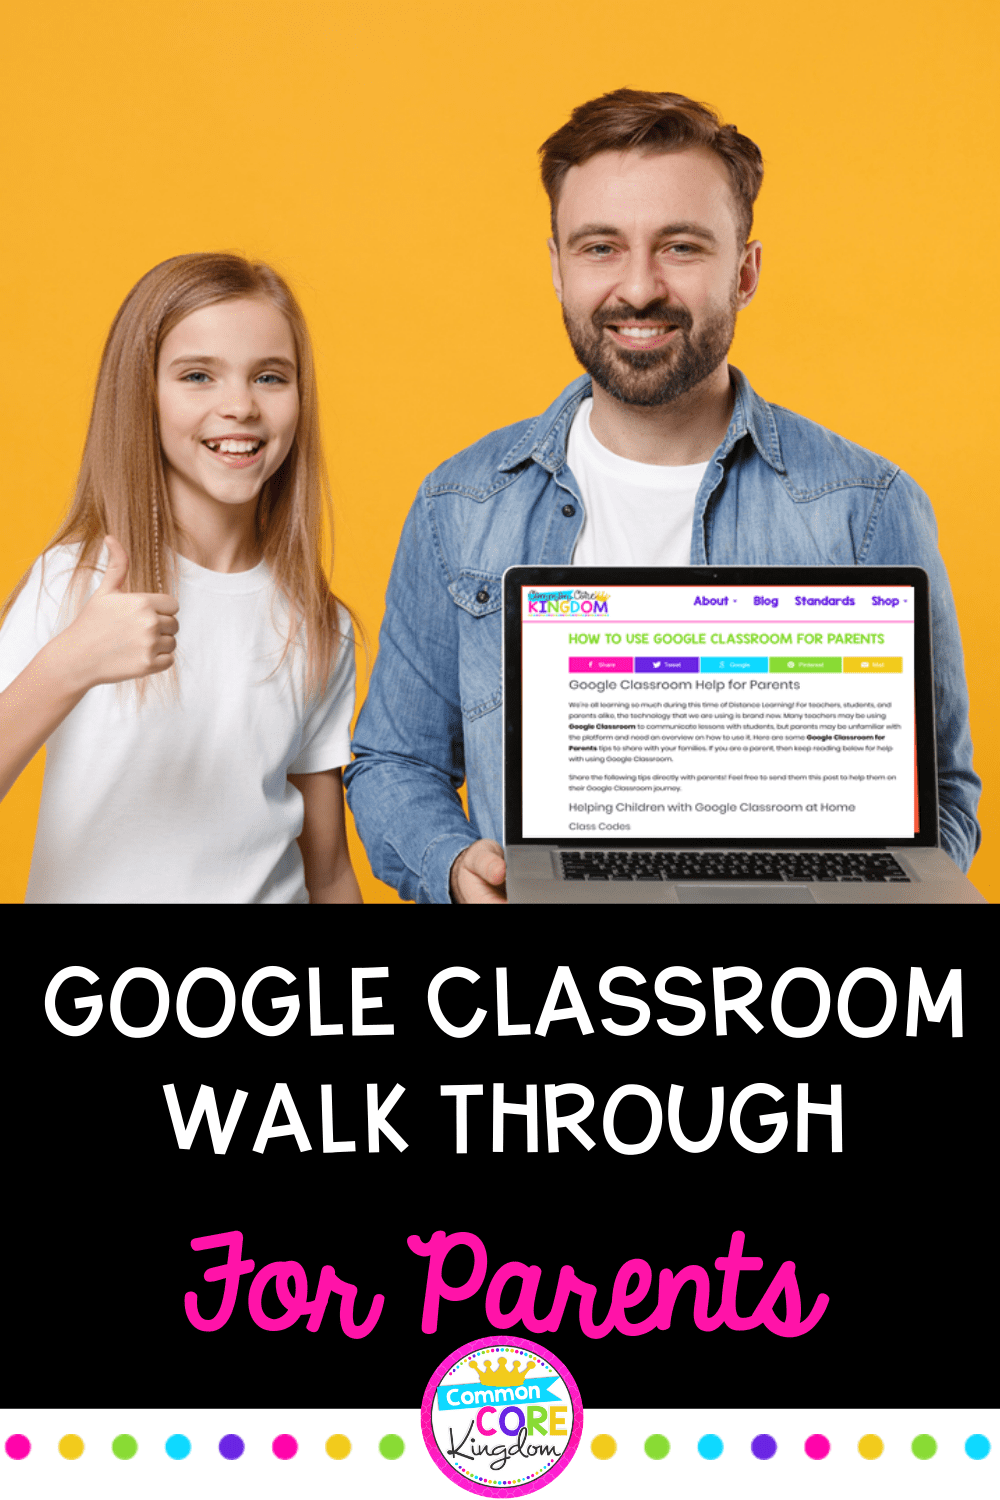 Image showing father and daughter with father holding a computer showing a blog post about how to use google classroom. Both are smiling and seem happy.